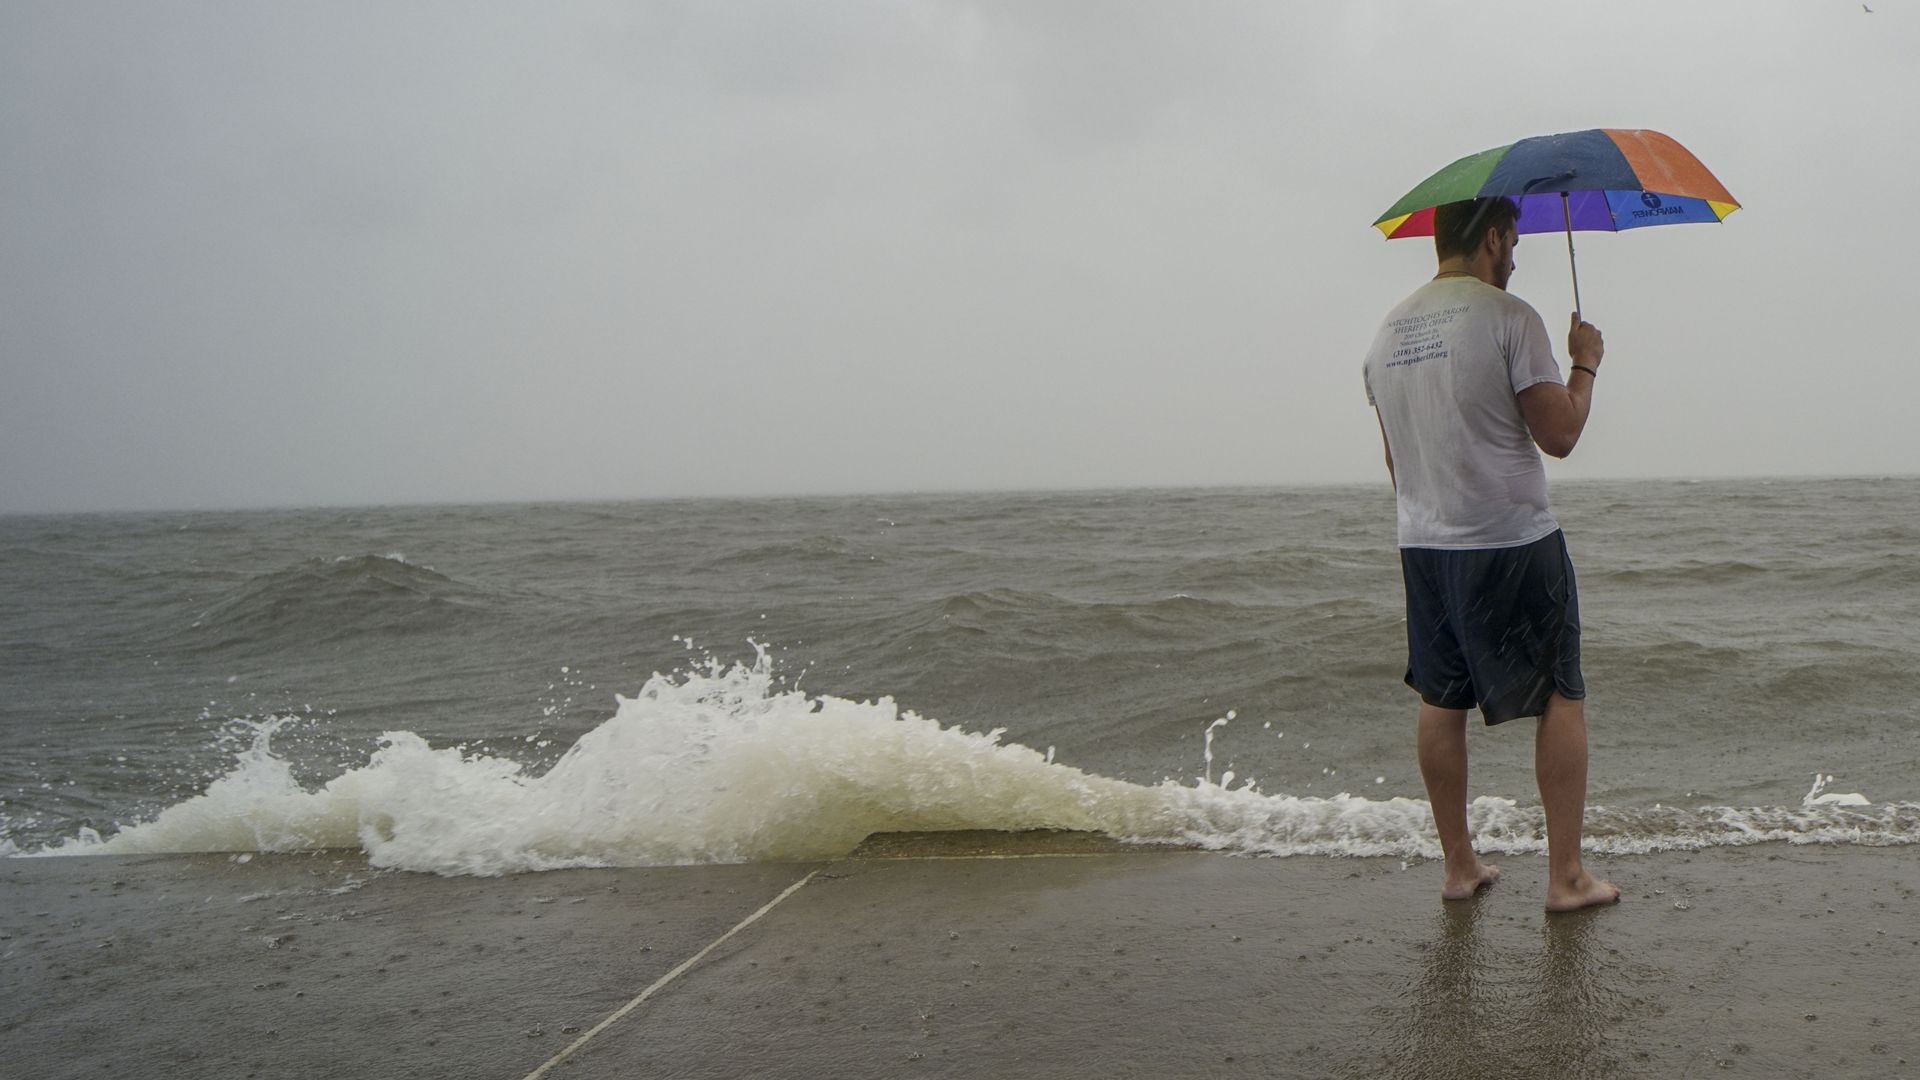 A man stands barefoot next to Lake Pontchartrain as waves crest. He is wearing a T-shirt and shorts while holding a rainbow-colored umbrella.